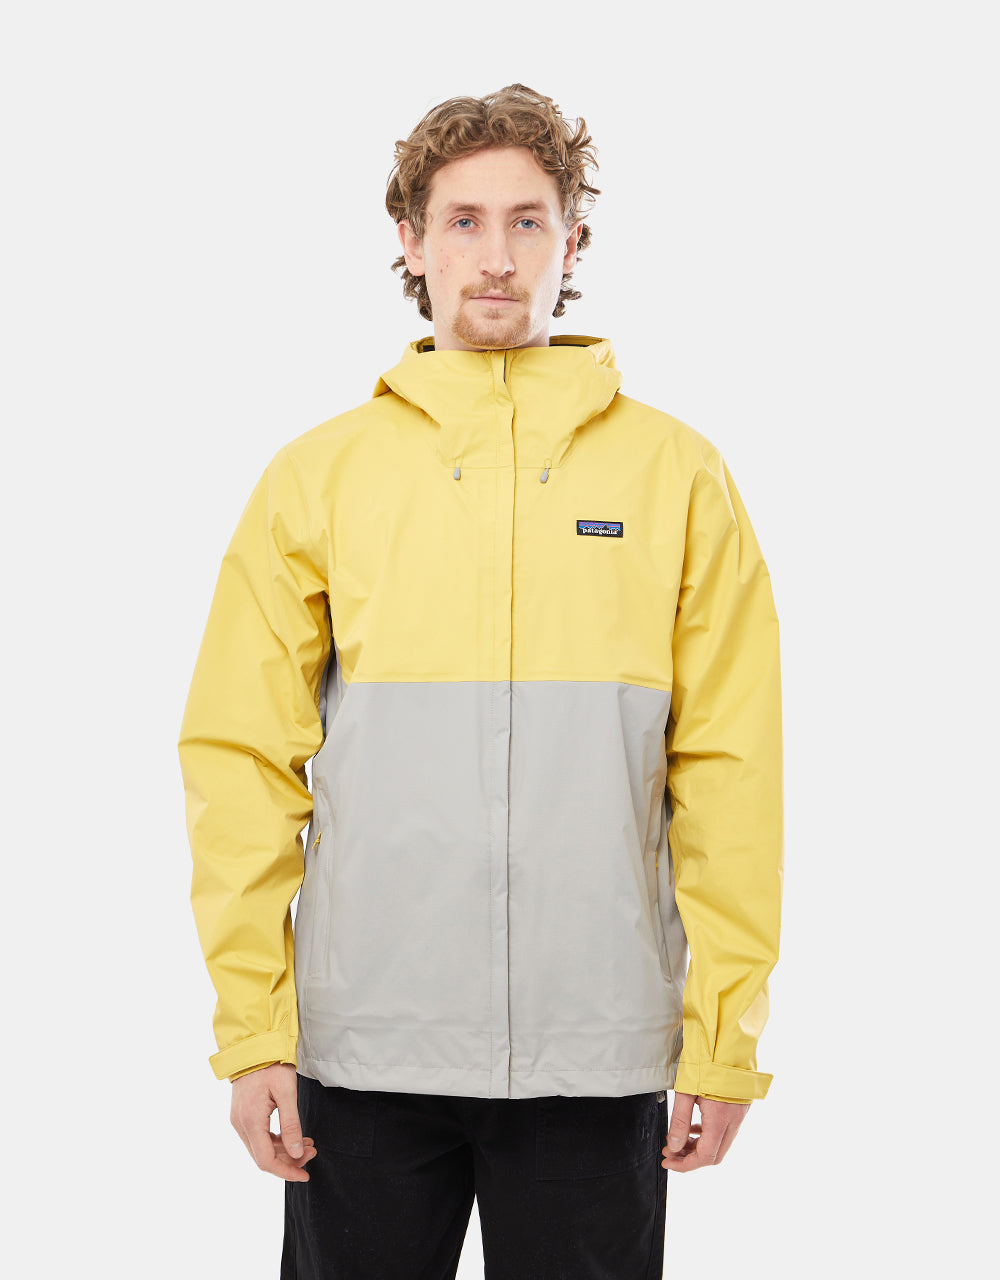 Patagonia Torrentshell 3L Jacket - Surfboard Yellow – Route One